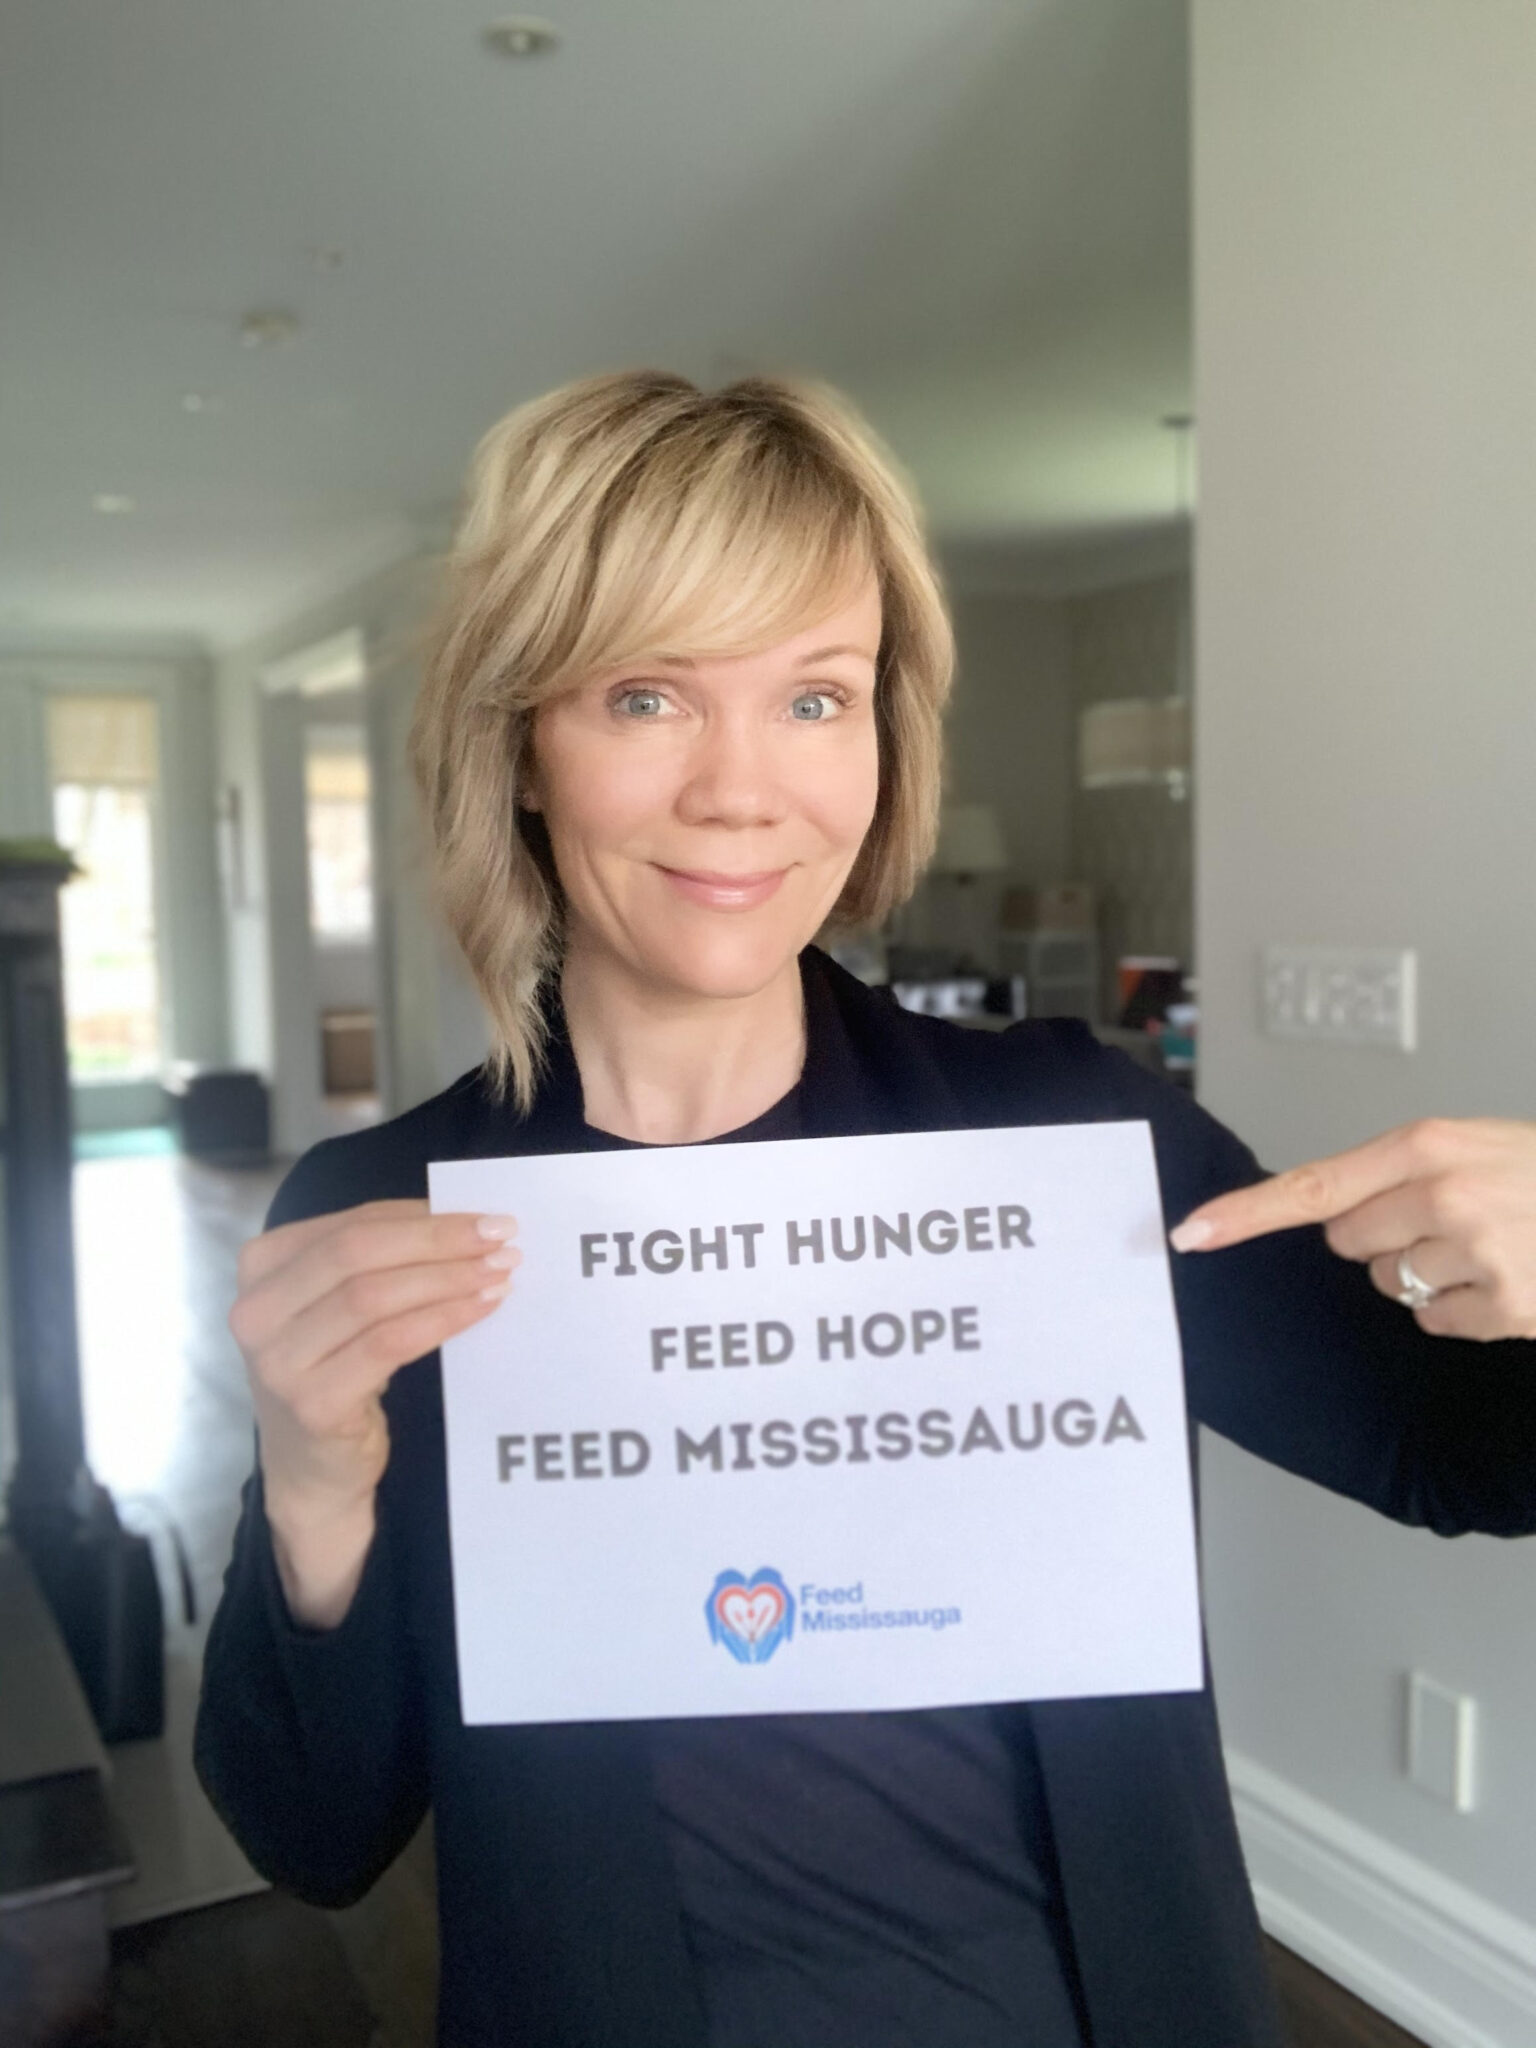 Corrie advocating for Feed Mississauga